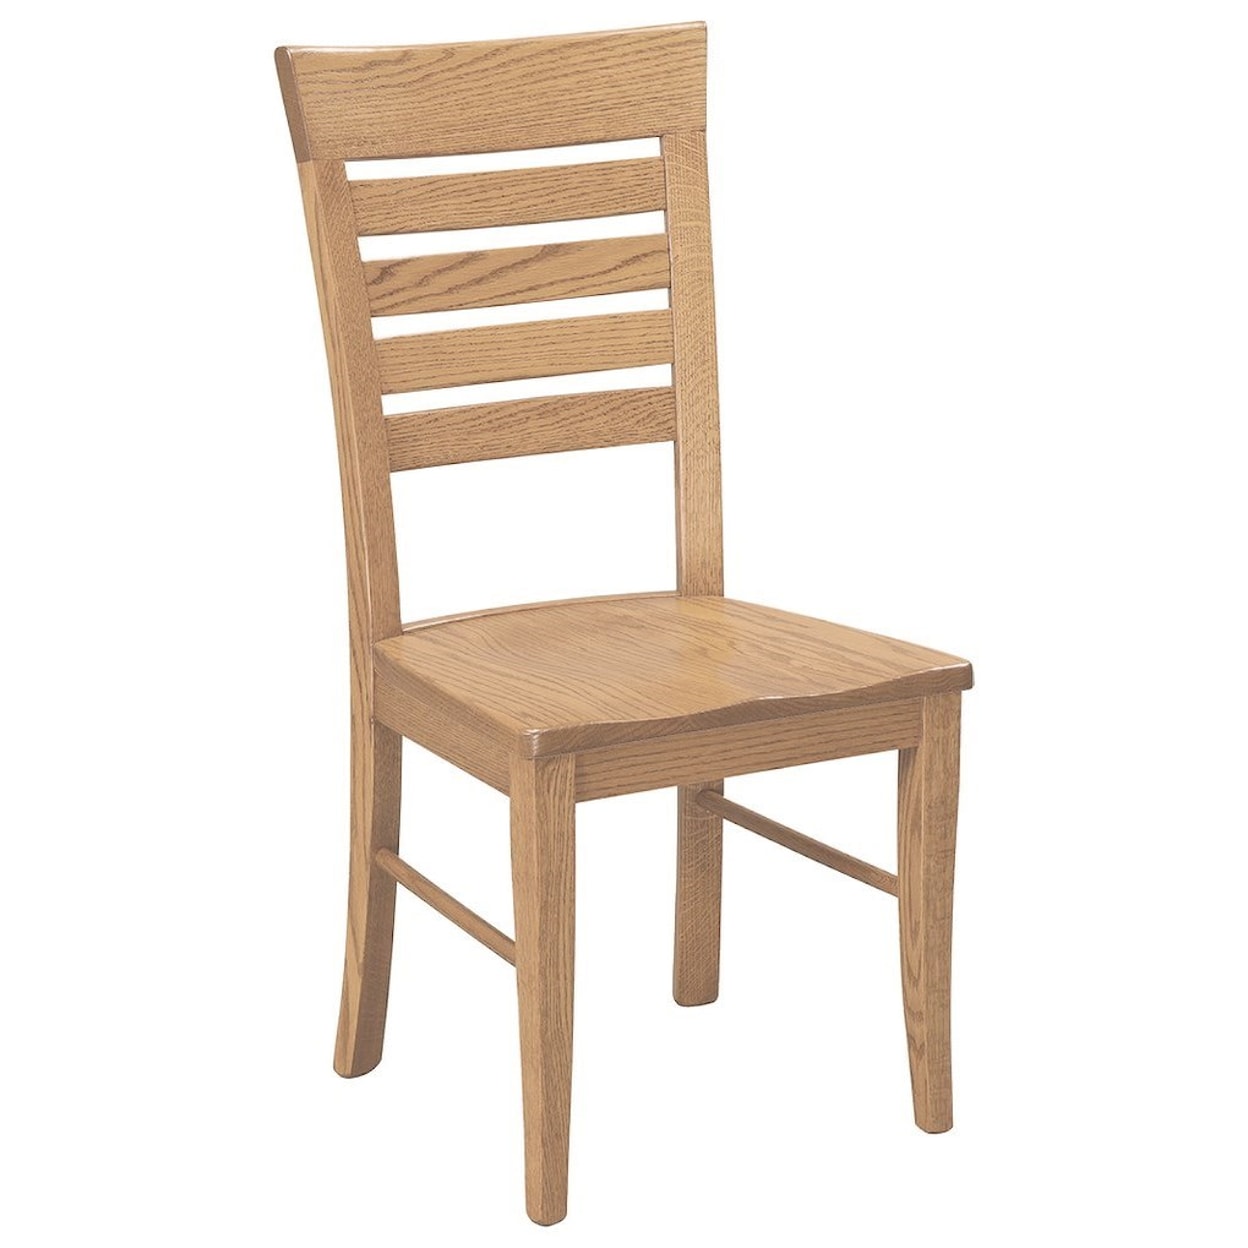 Daniel's Amish Chairs and Barstools Metro Ladder Side Chair